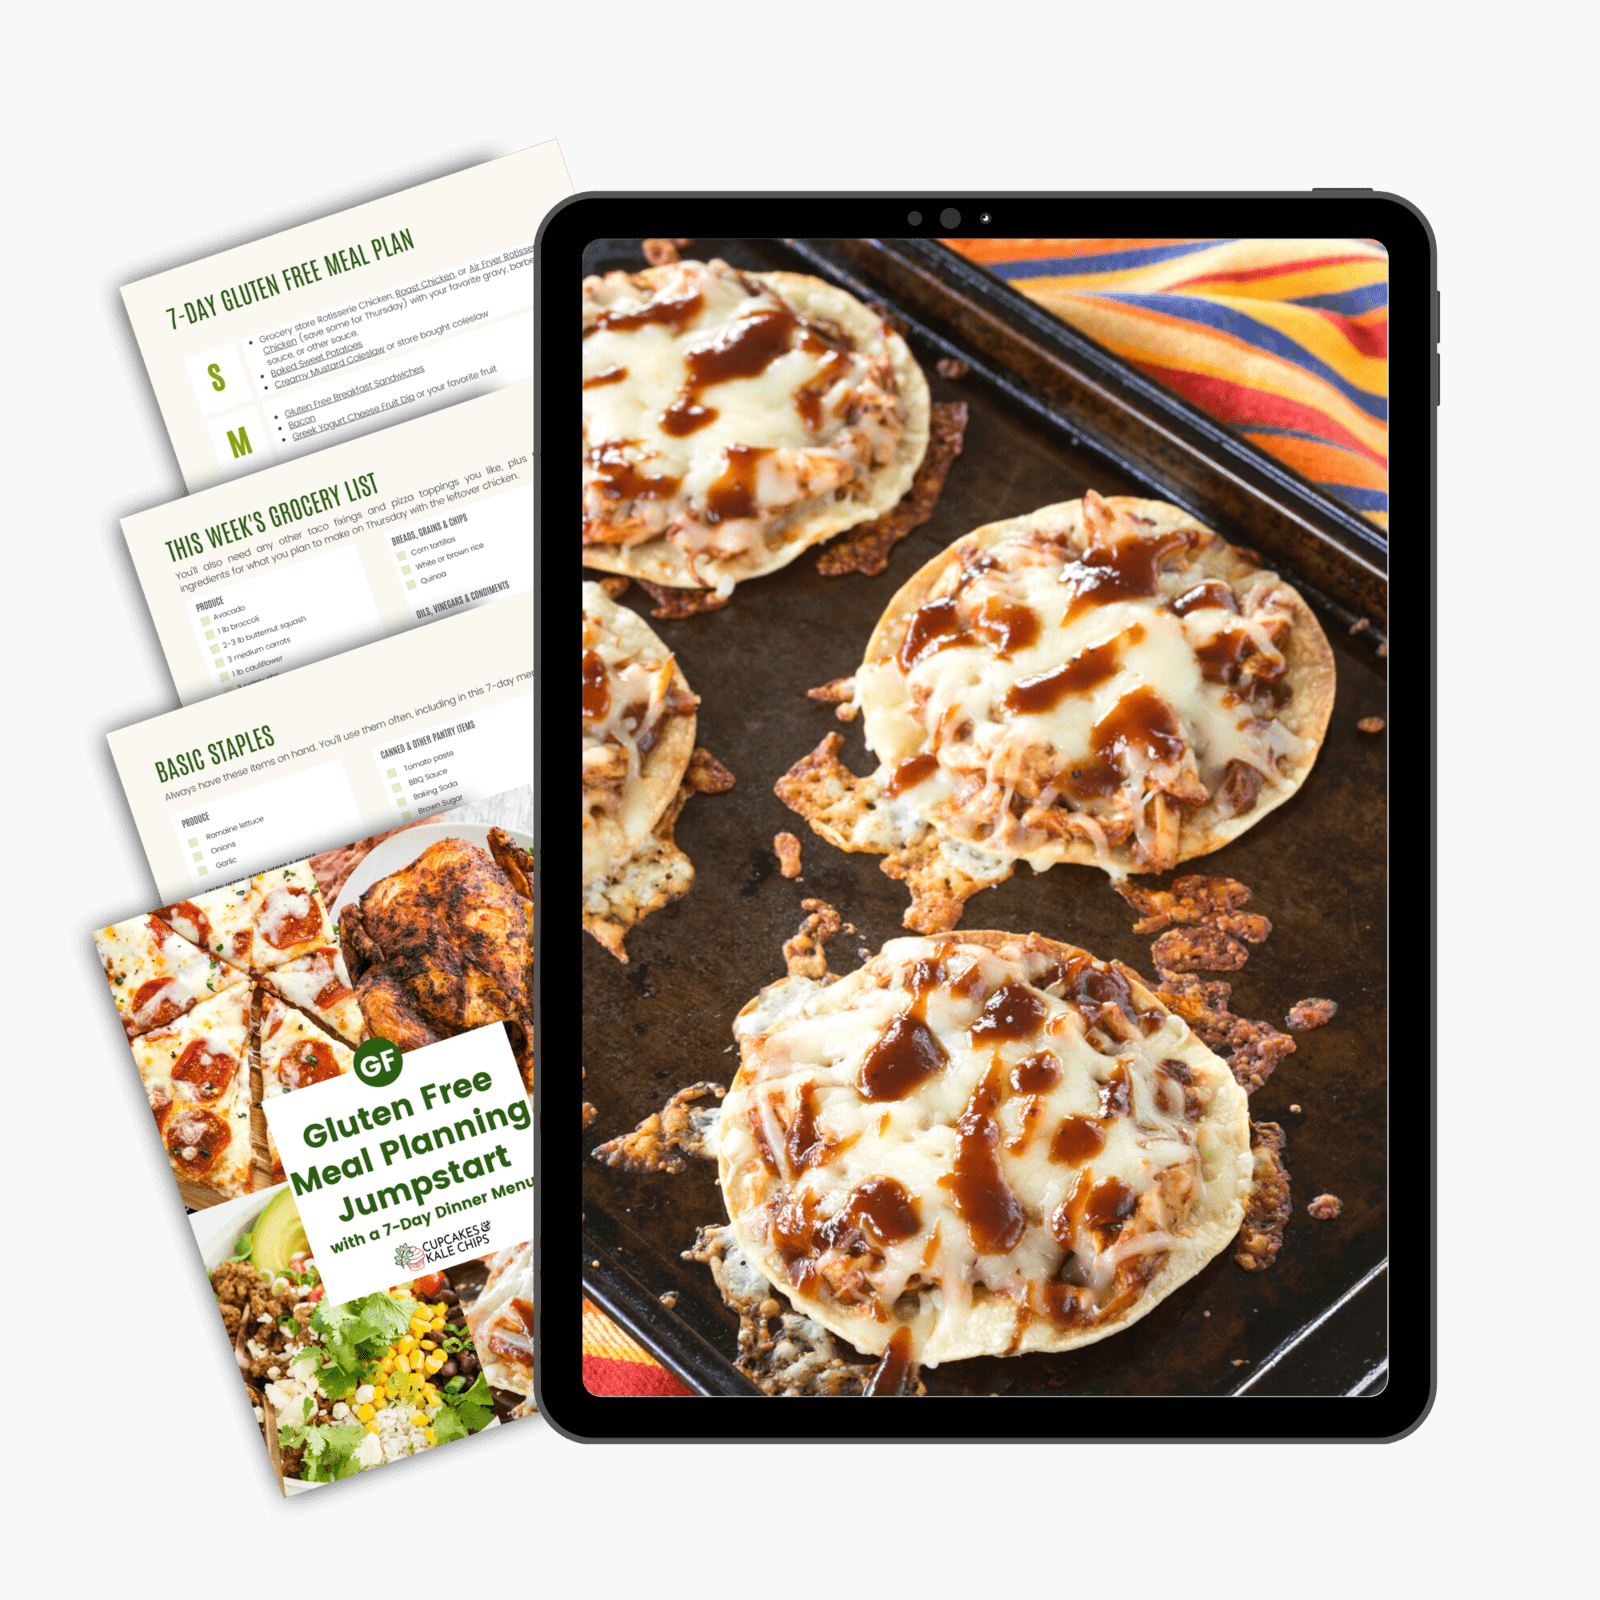 barbecue chicken tostadas on an ipad screen with pages from an eBook behind it.